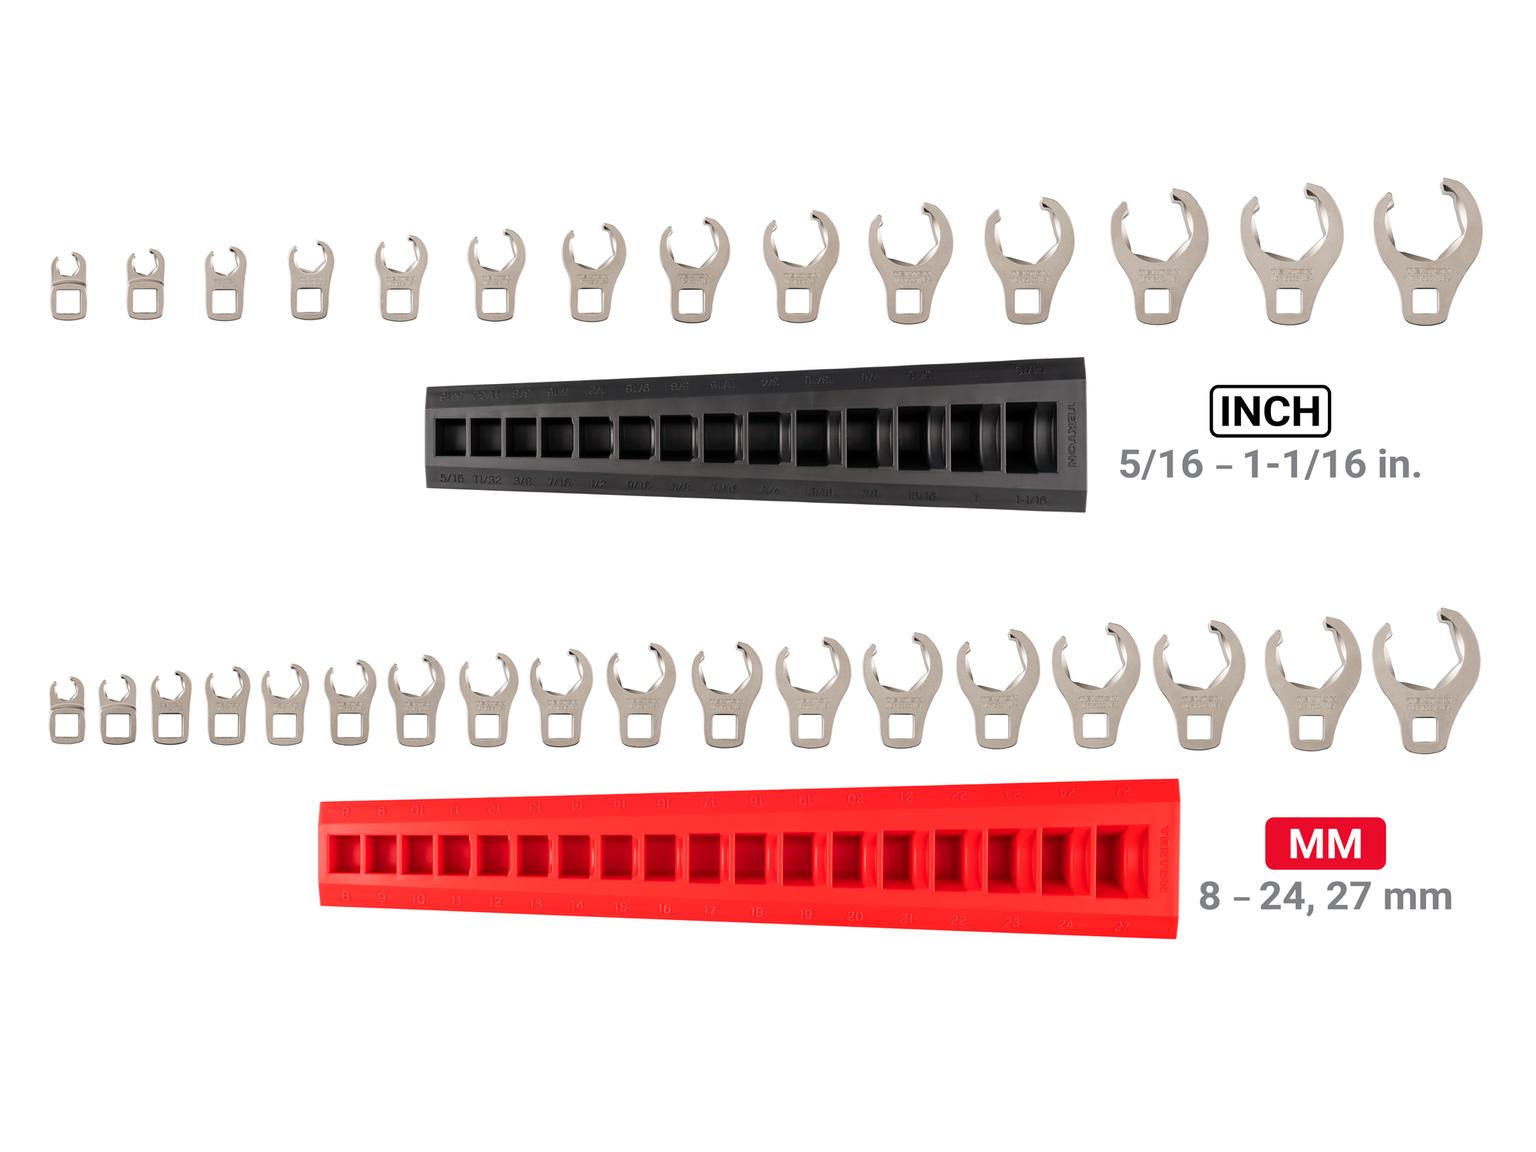 TEKTON WCF92320-T 3/8 Inch Drive 6-Point Flare Nut Crowfoot Wrench Set with Rack, 32-Piece (5/16 - 1-1/16 in., 8-27 mm)